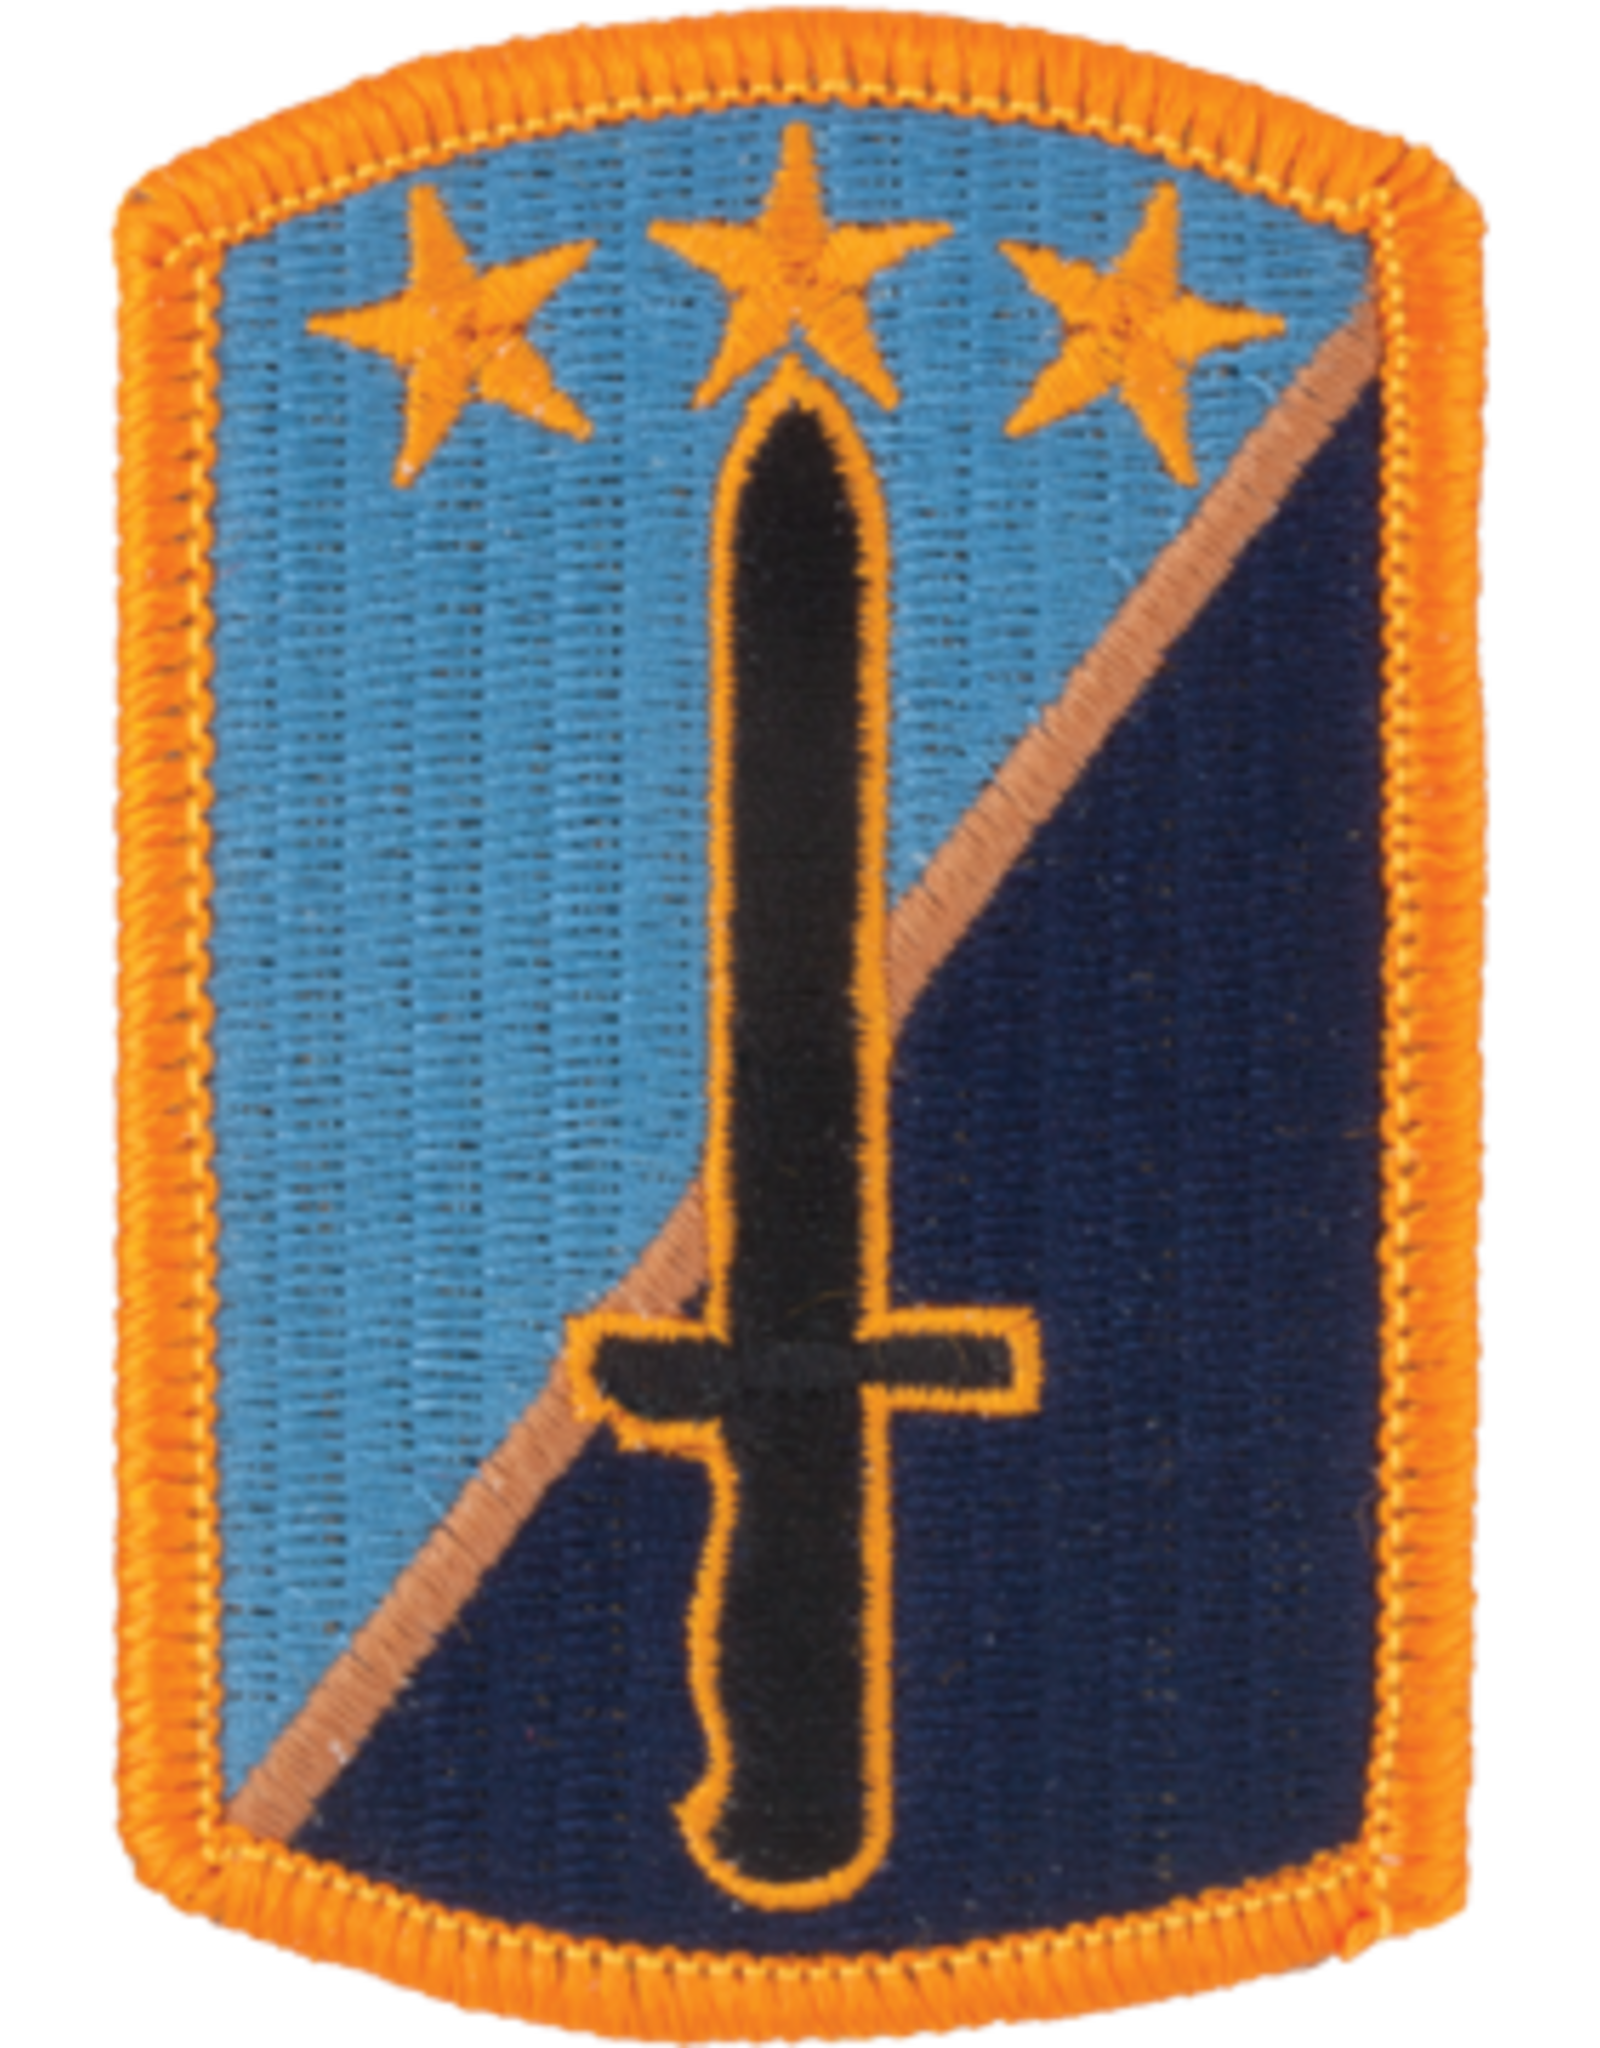 170th Infantry Patch